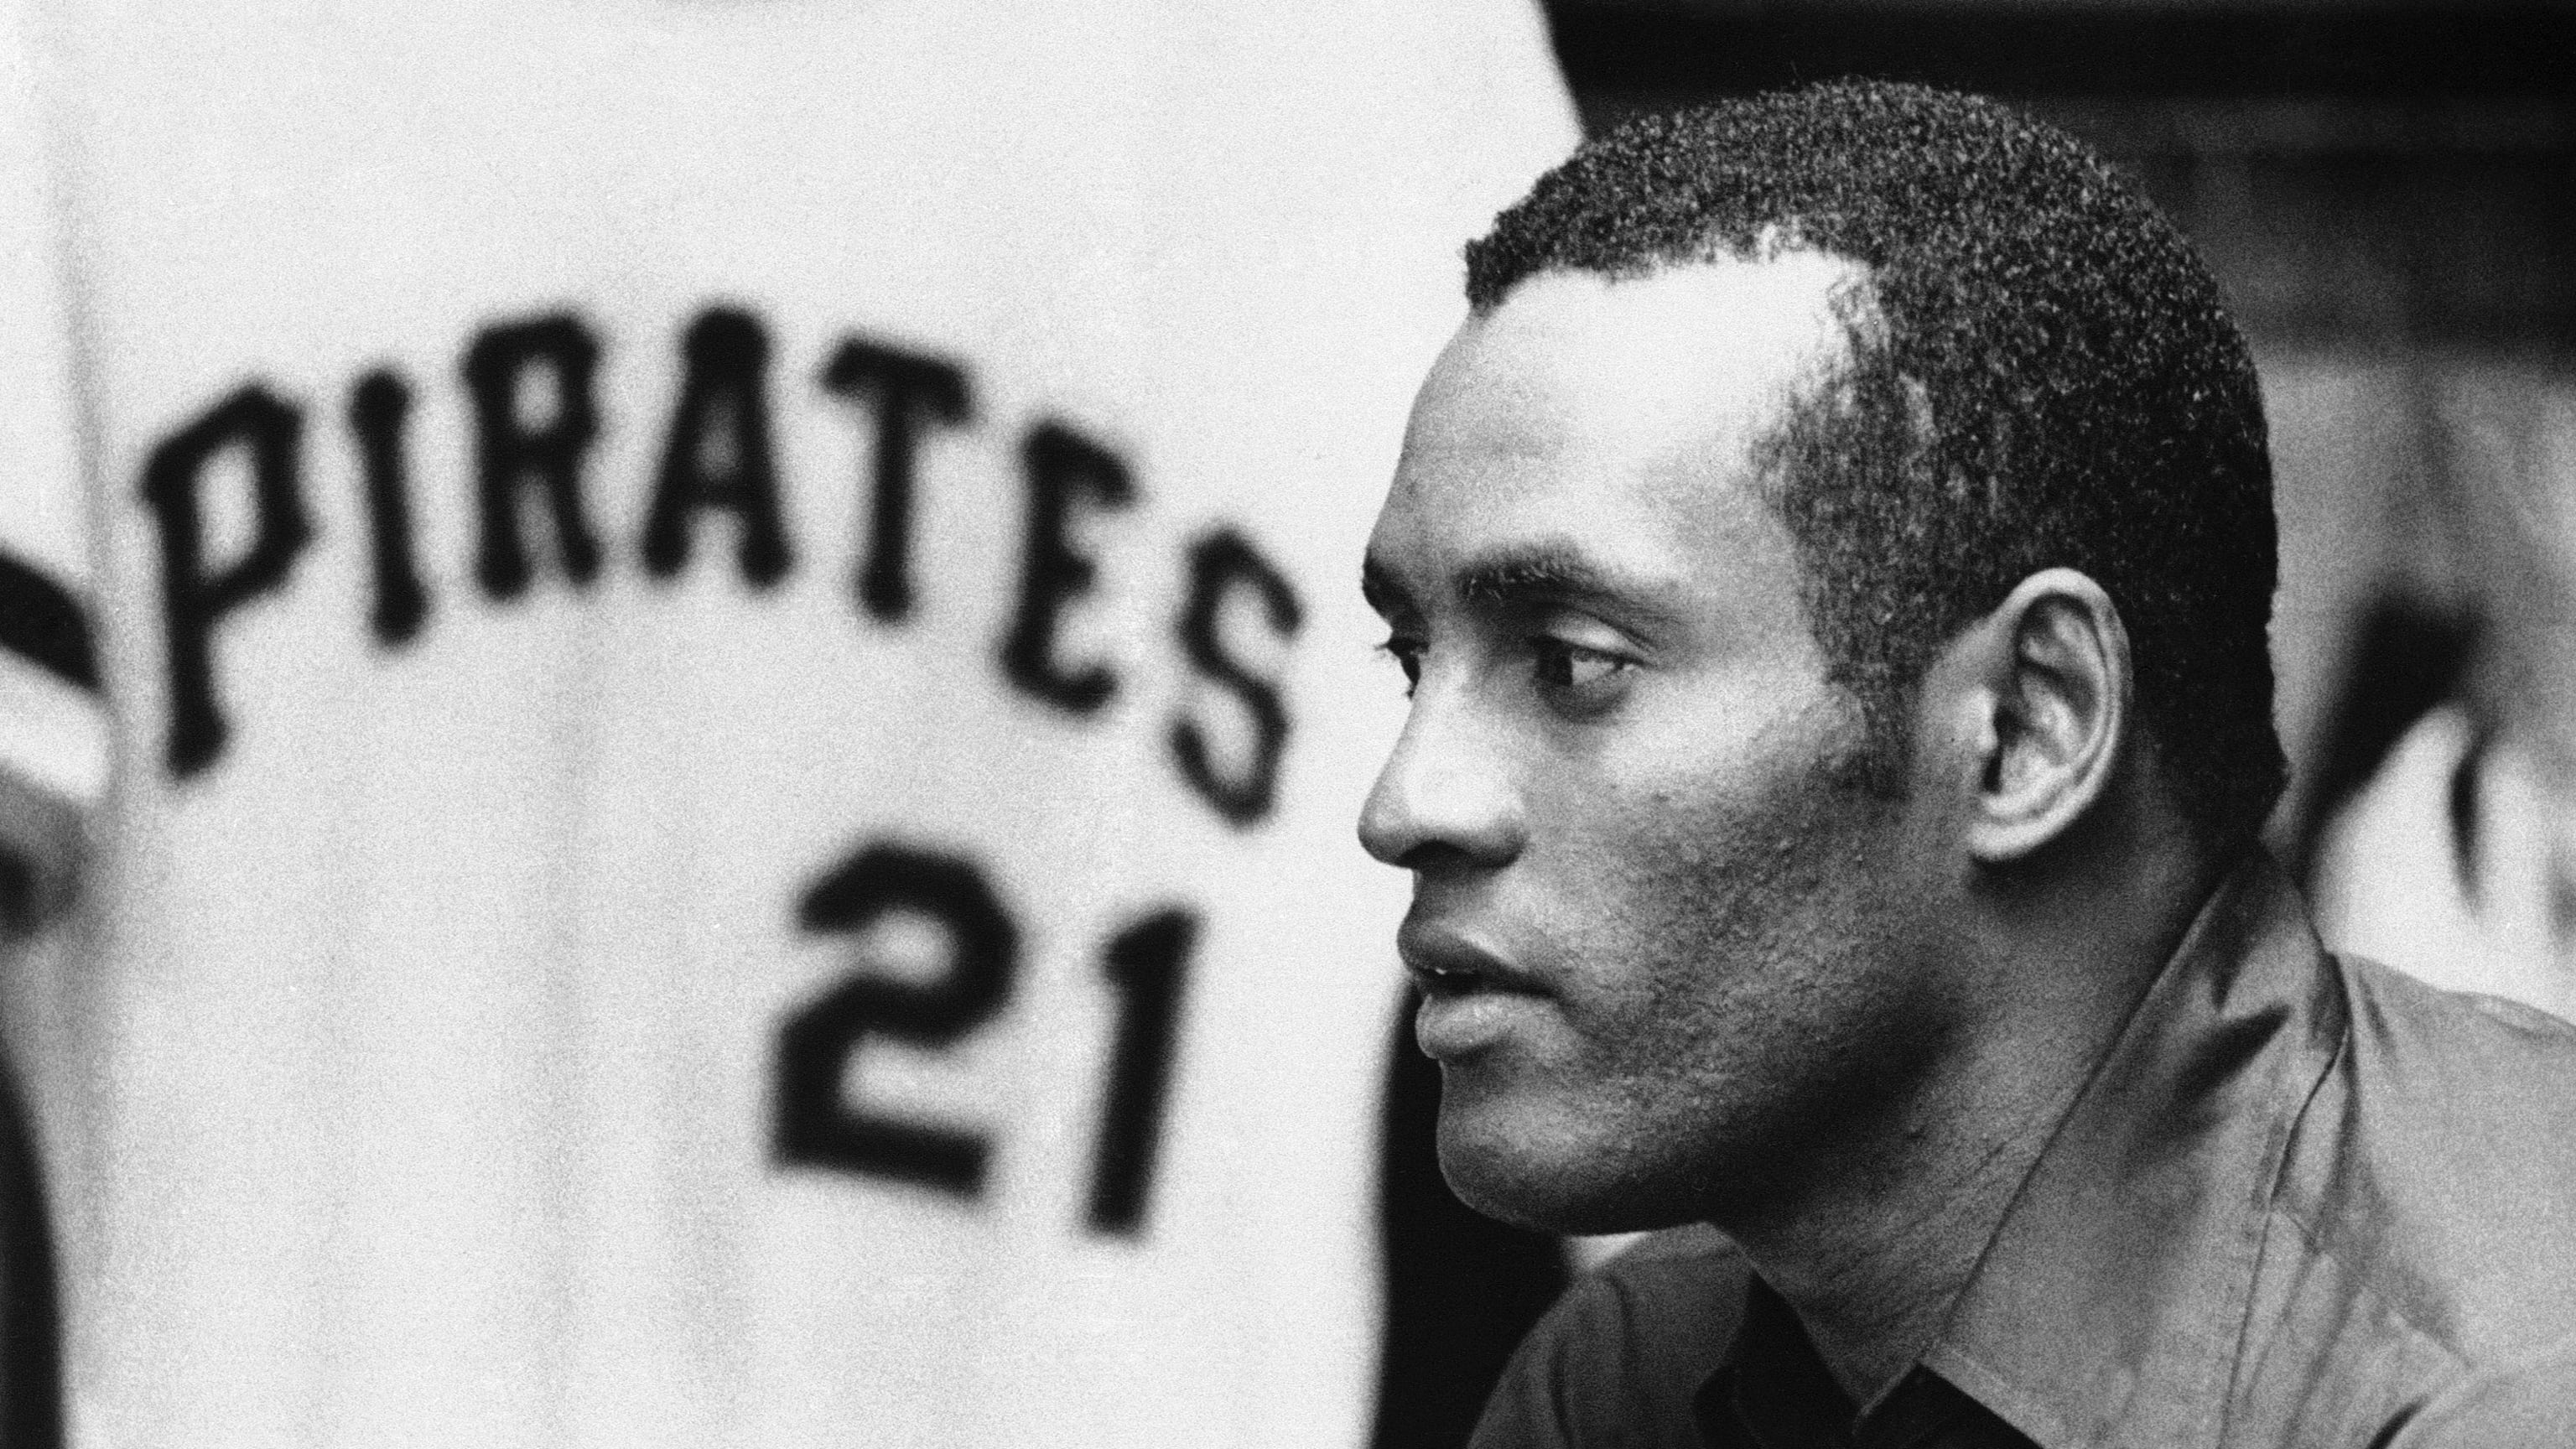 Braves Briefing: Today's Roberto Clemente Day across MLB - Sports